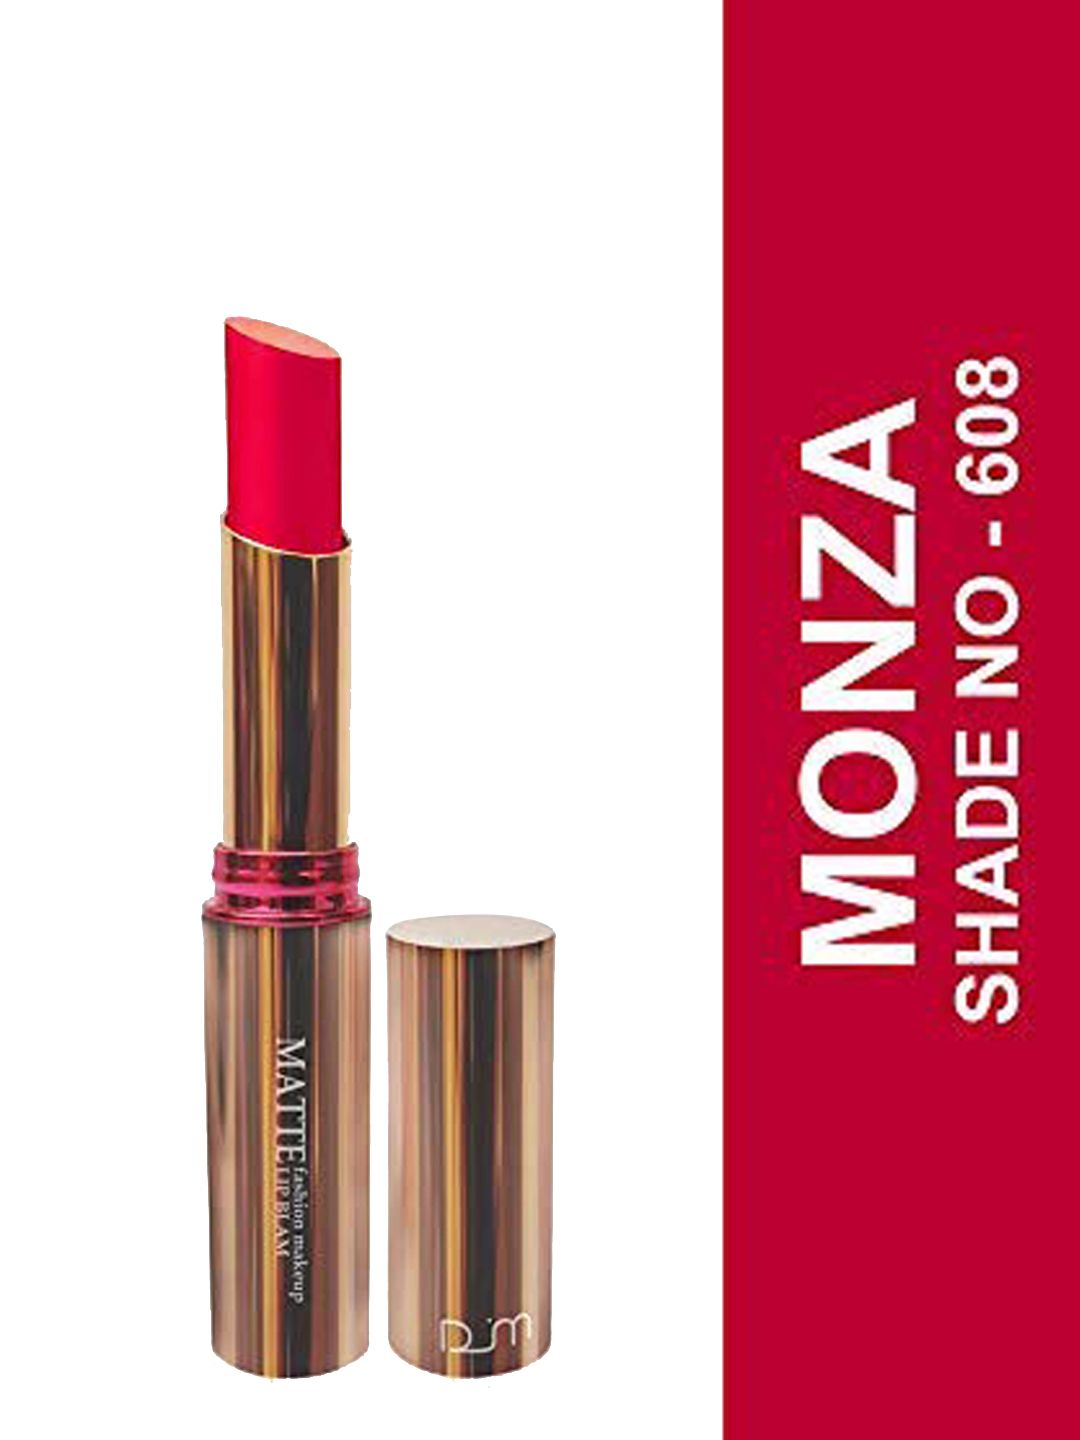 Seven Seas Matte With You Lipstick, 3.8 g Price in India